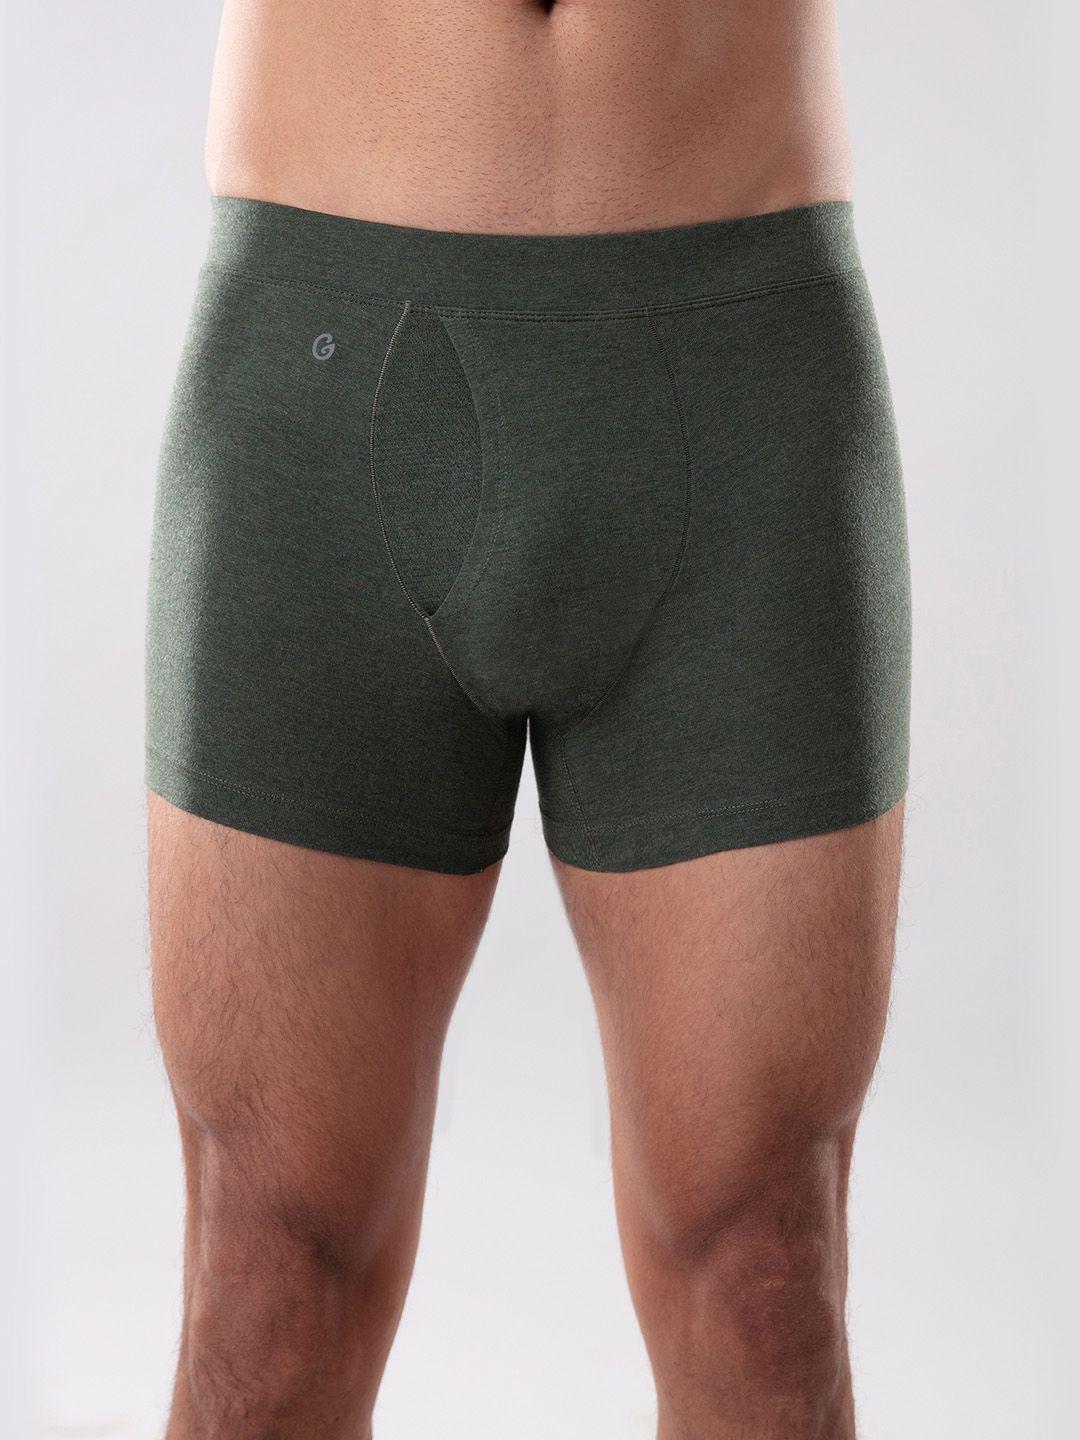 gloot men olive green trunk with anti odor & cool mesh zones